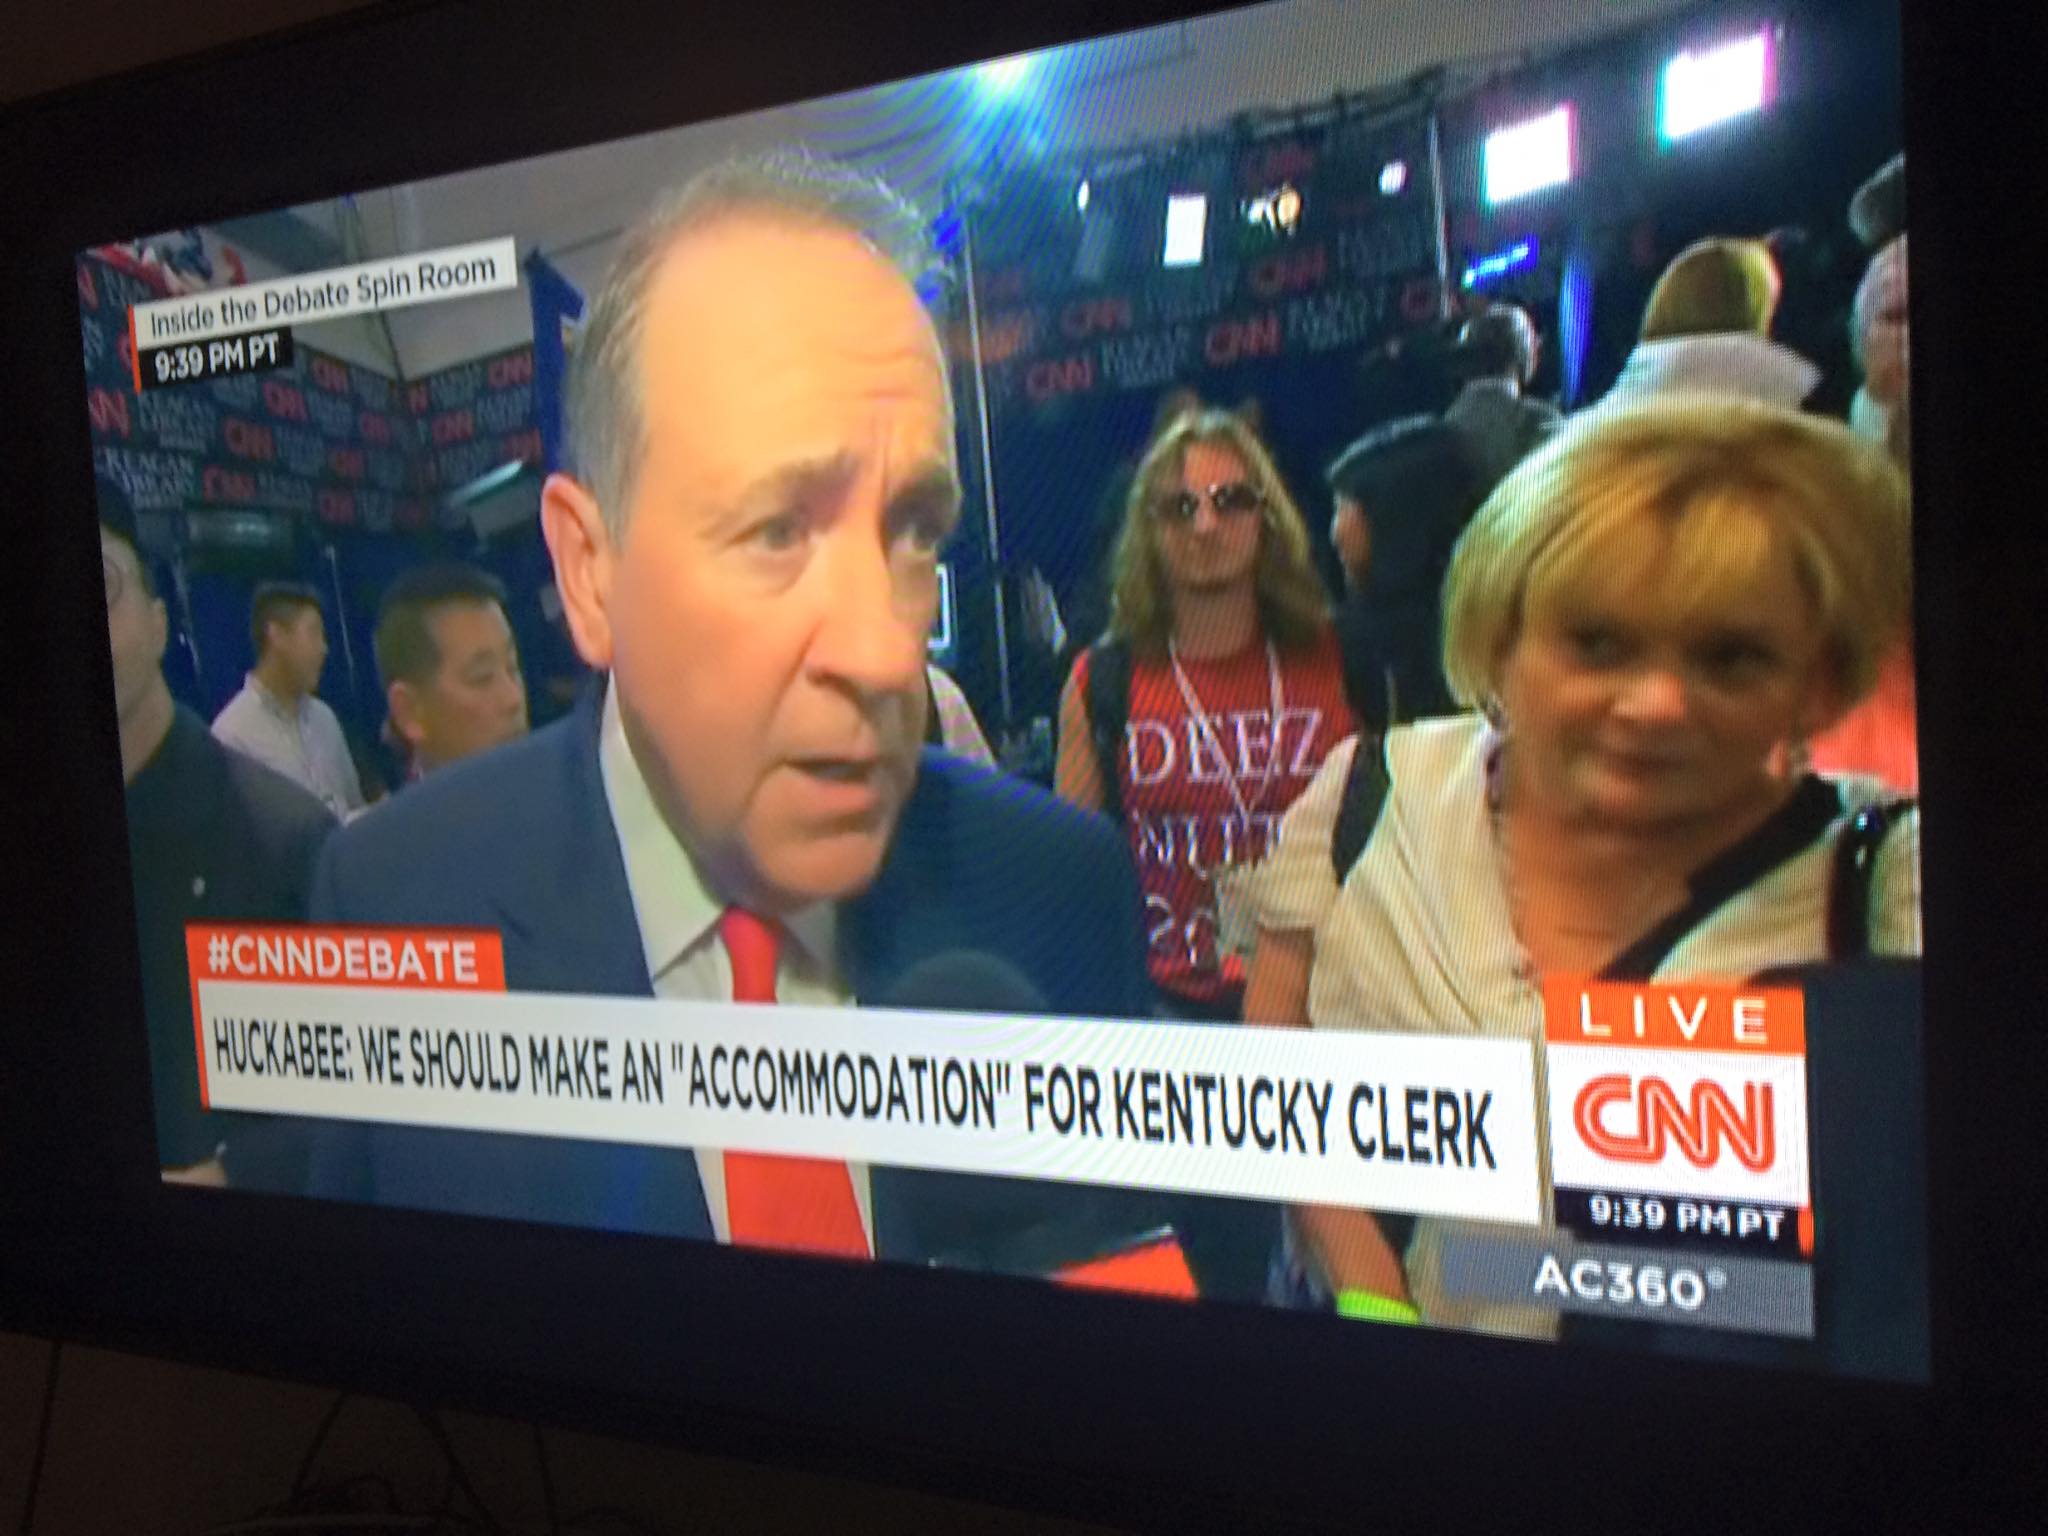 Deez Nuts candidate in the background